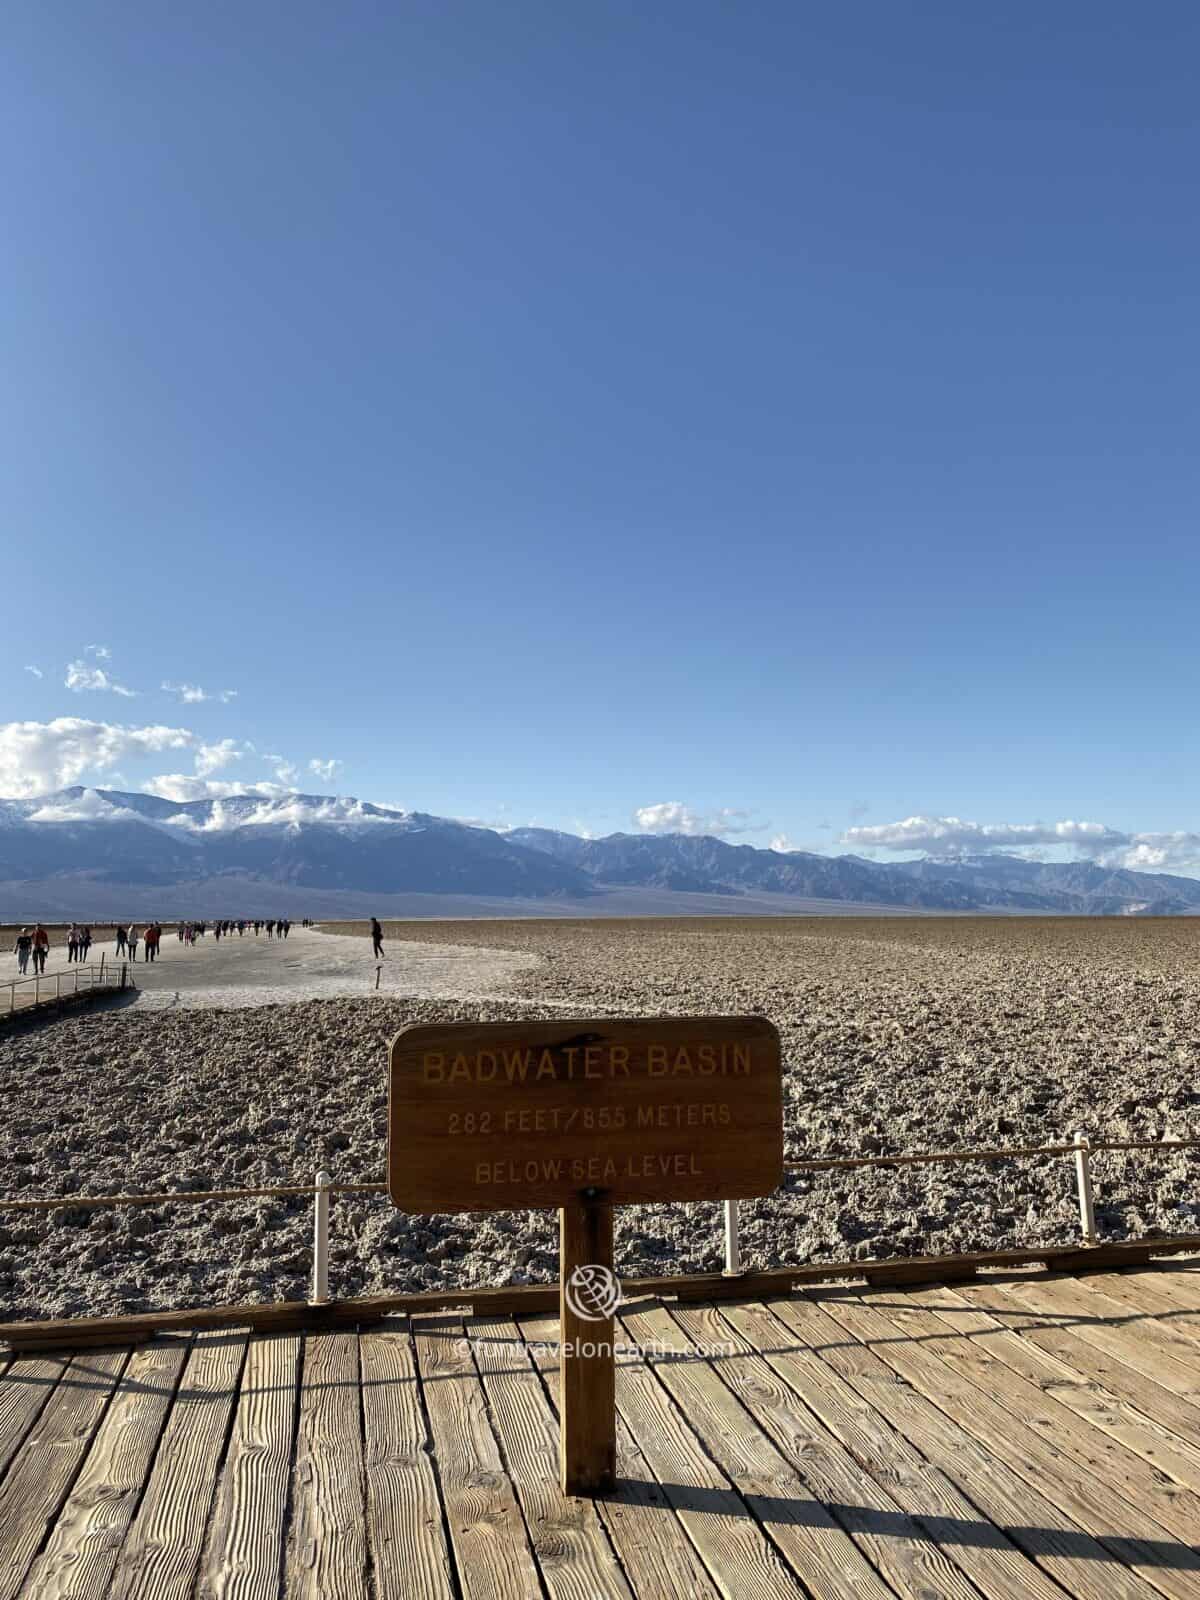 death valley, badwater basin